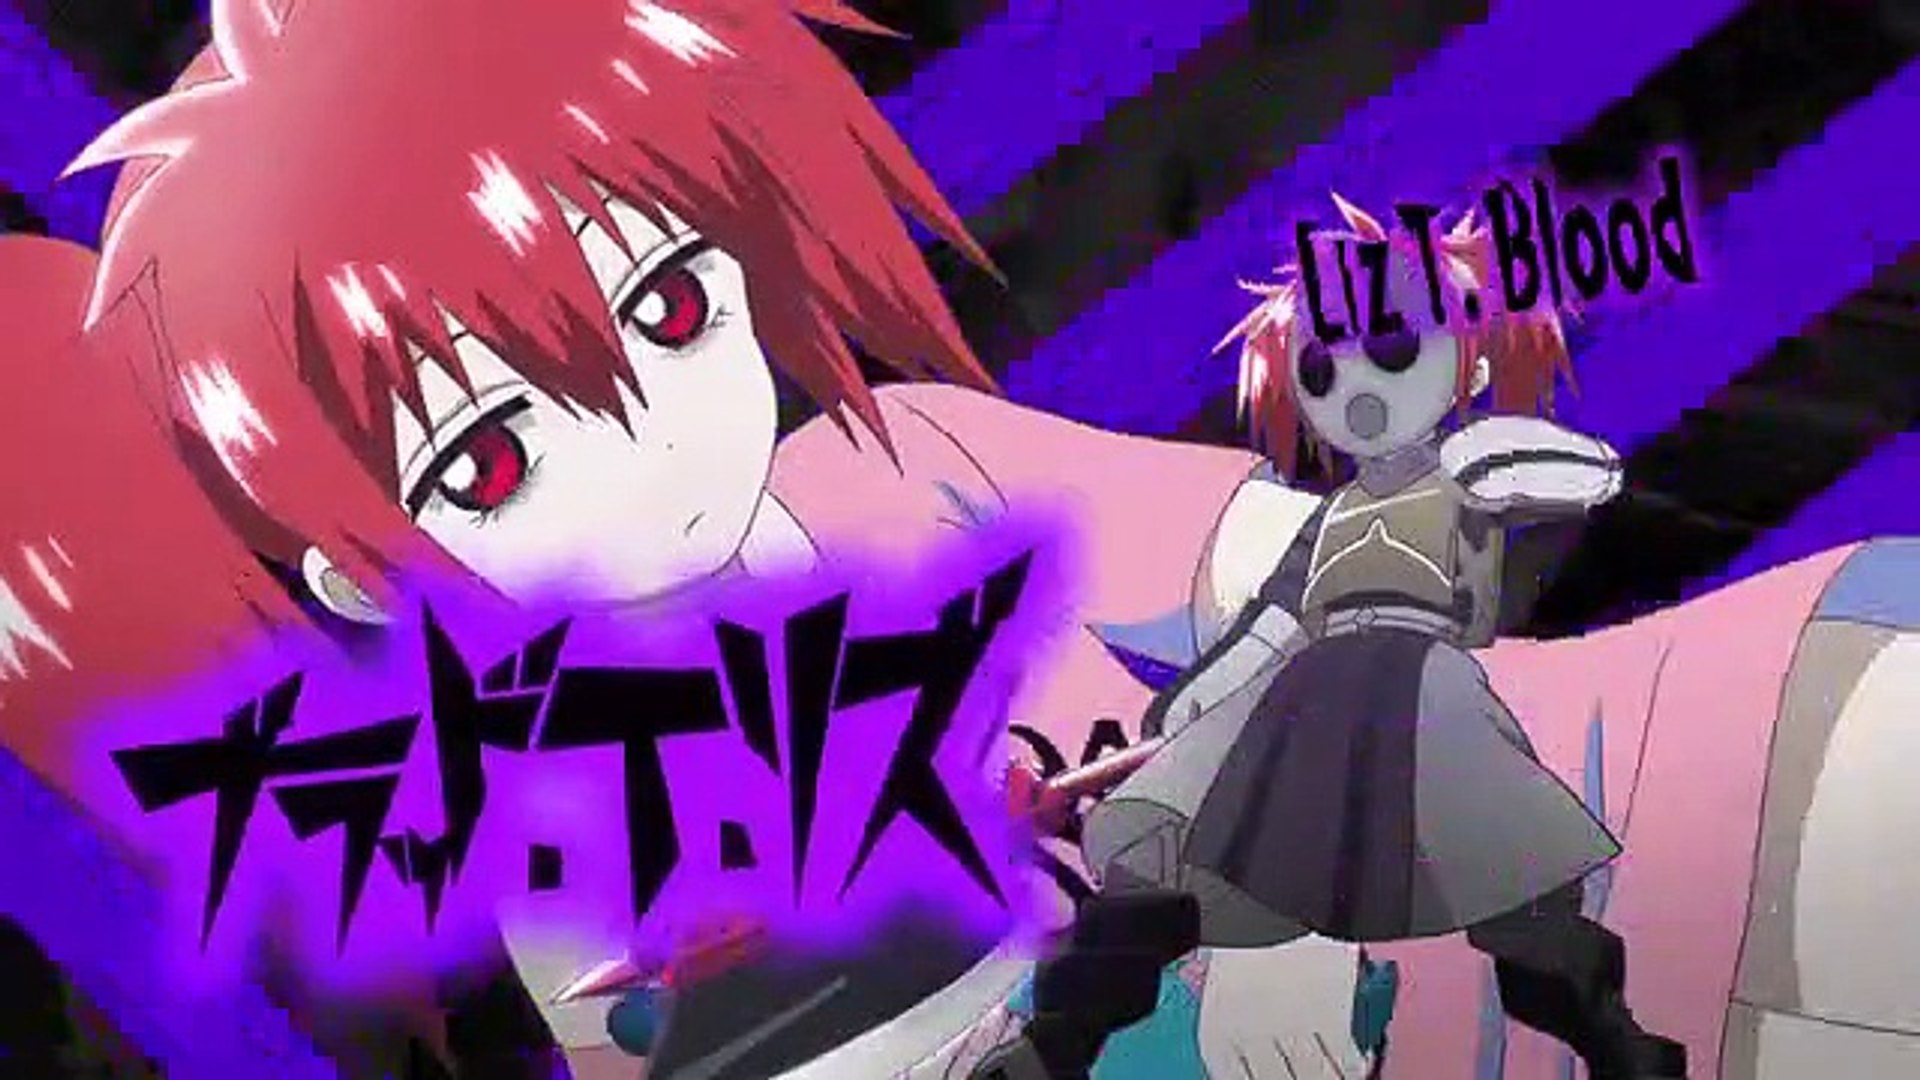 Blood Lad - OVA - Lost in Anime